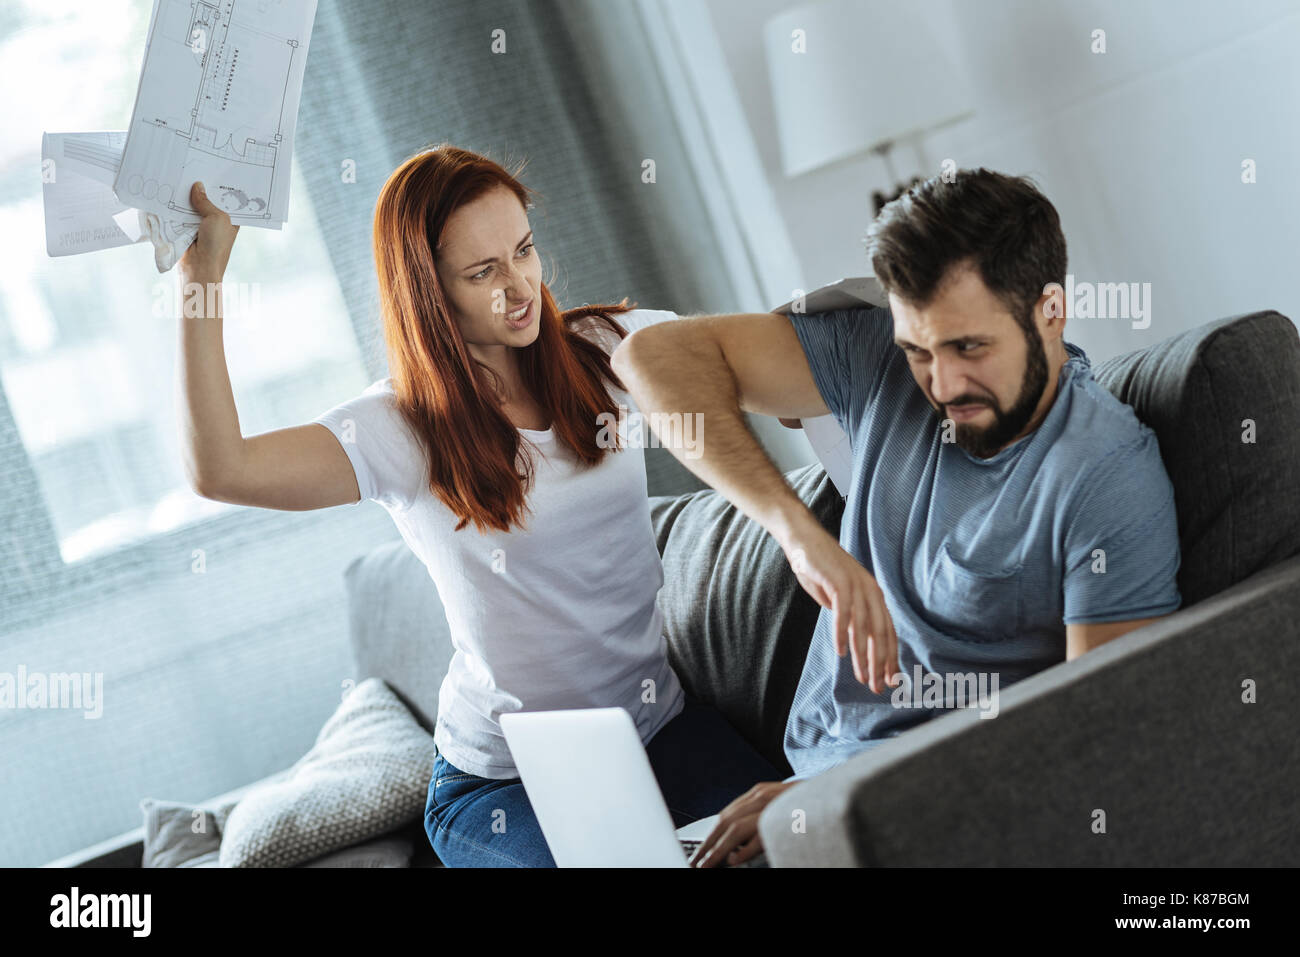 Furious red haired woman being angry at her boyfriend Stock Photo